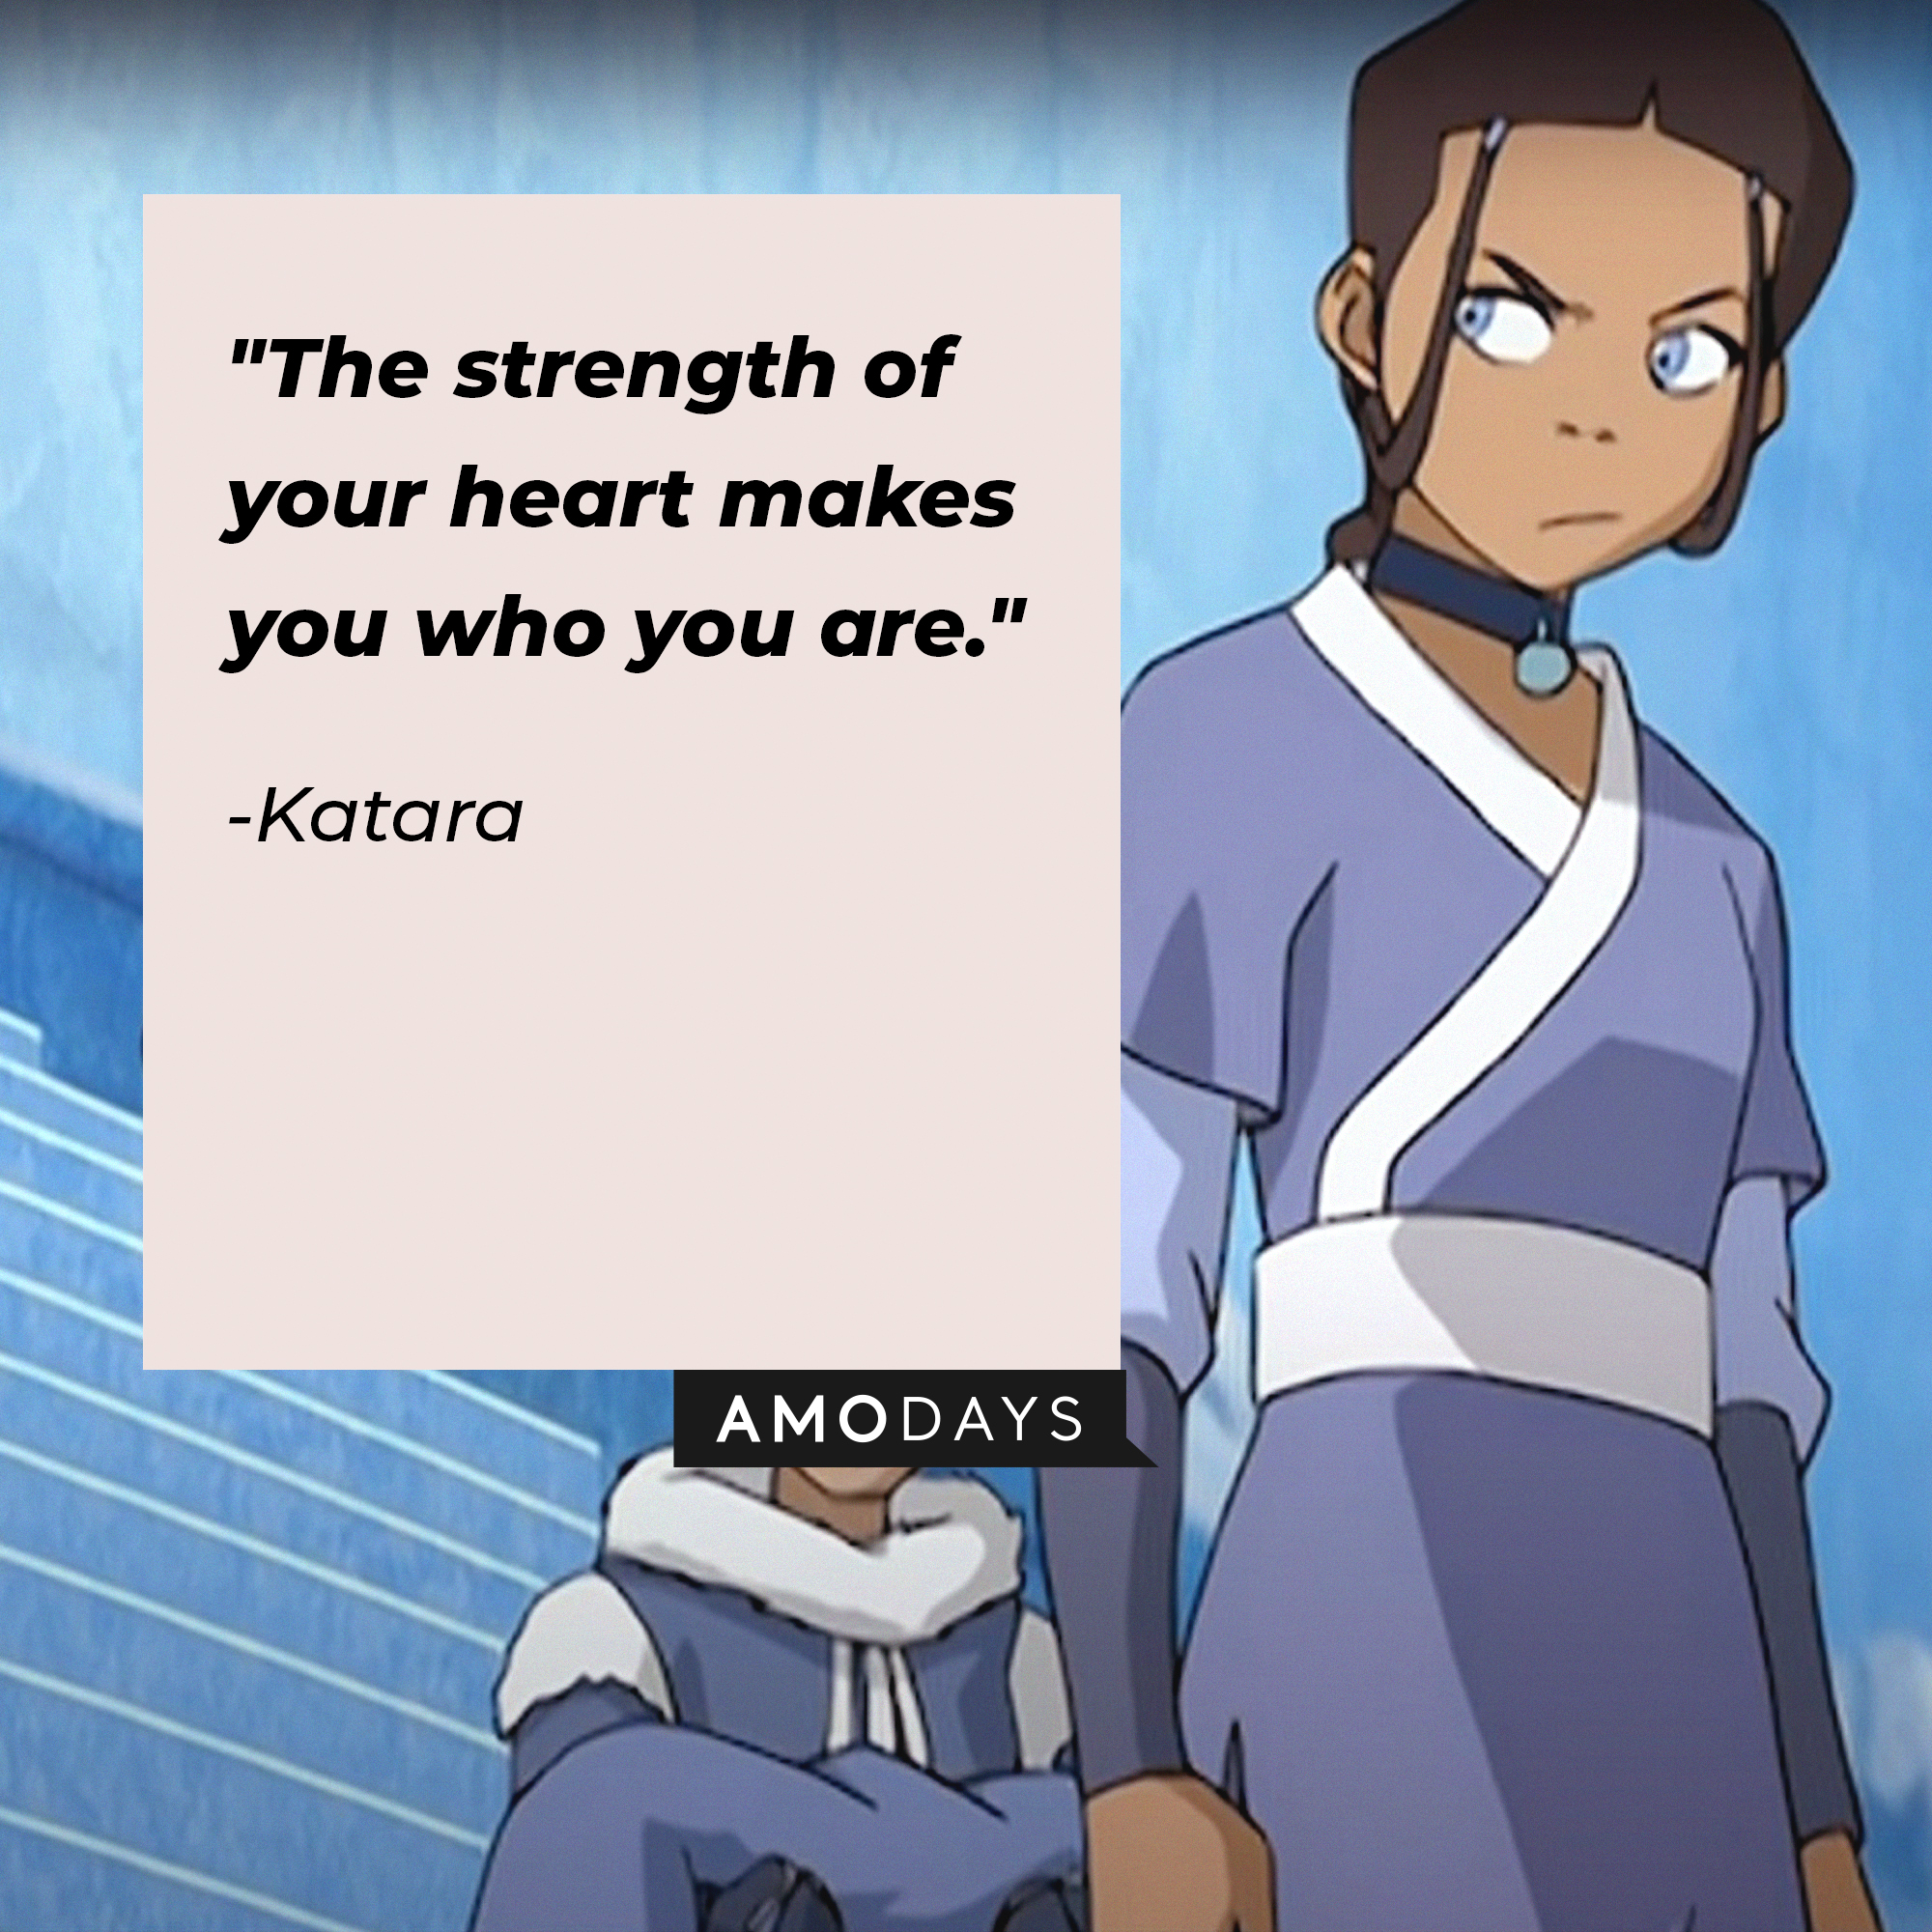 Katara's quote: "The strength of your heart makes you who you are." | Source: Youtube.com/TeamAvatar